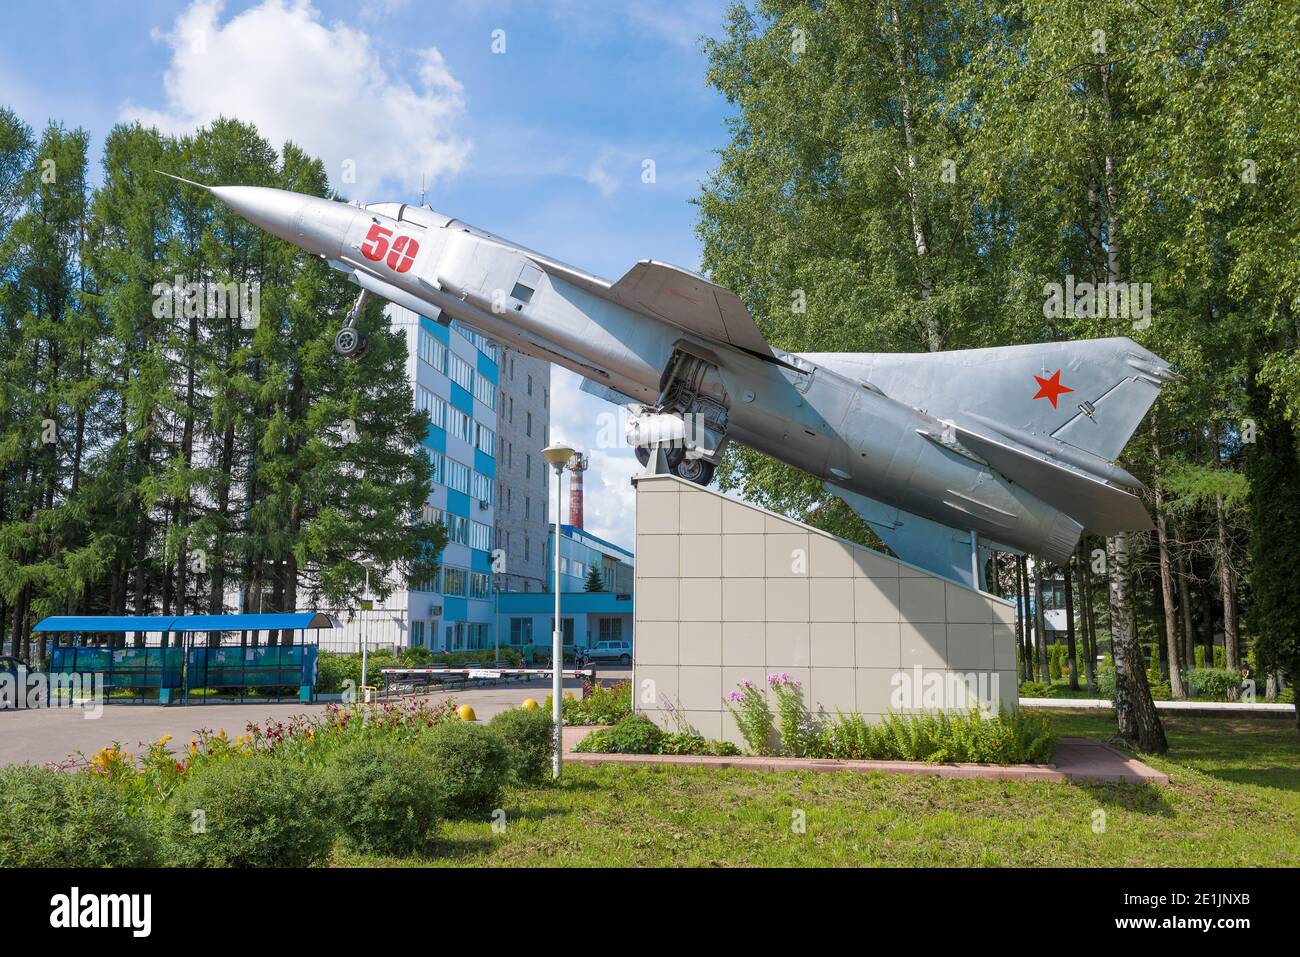 GAVRILOV YAM, RUSSIA - JULY15, 2019: The aircraft-monument MiG-23MLD near the machine-building plant 'Agat' on a sunny June day Gavrilov-Yam, Yaroslav Stock Photo